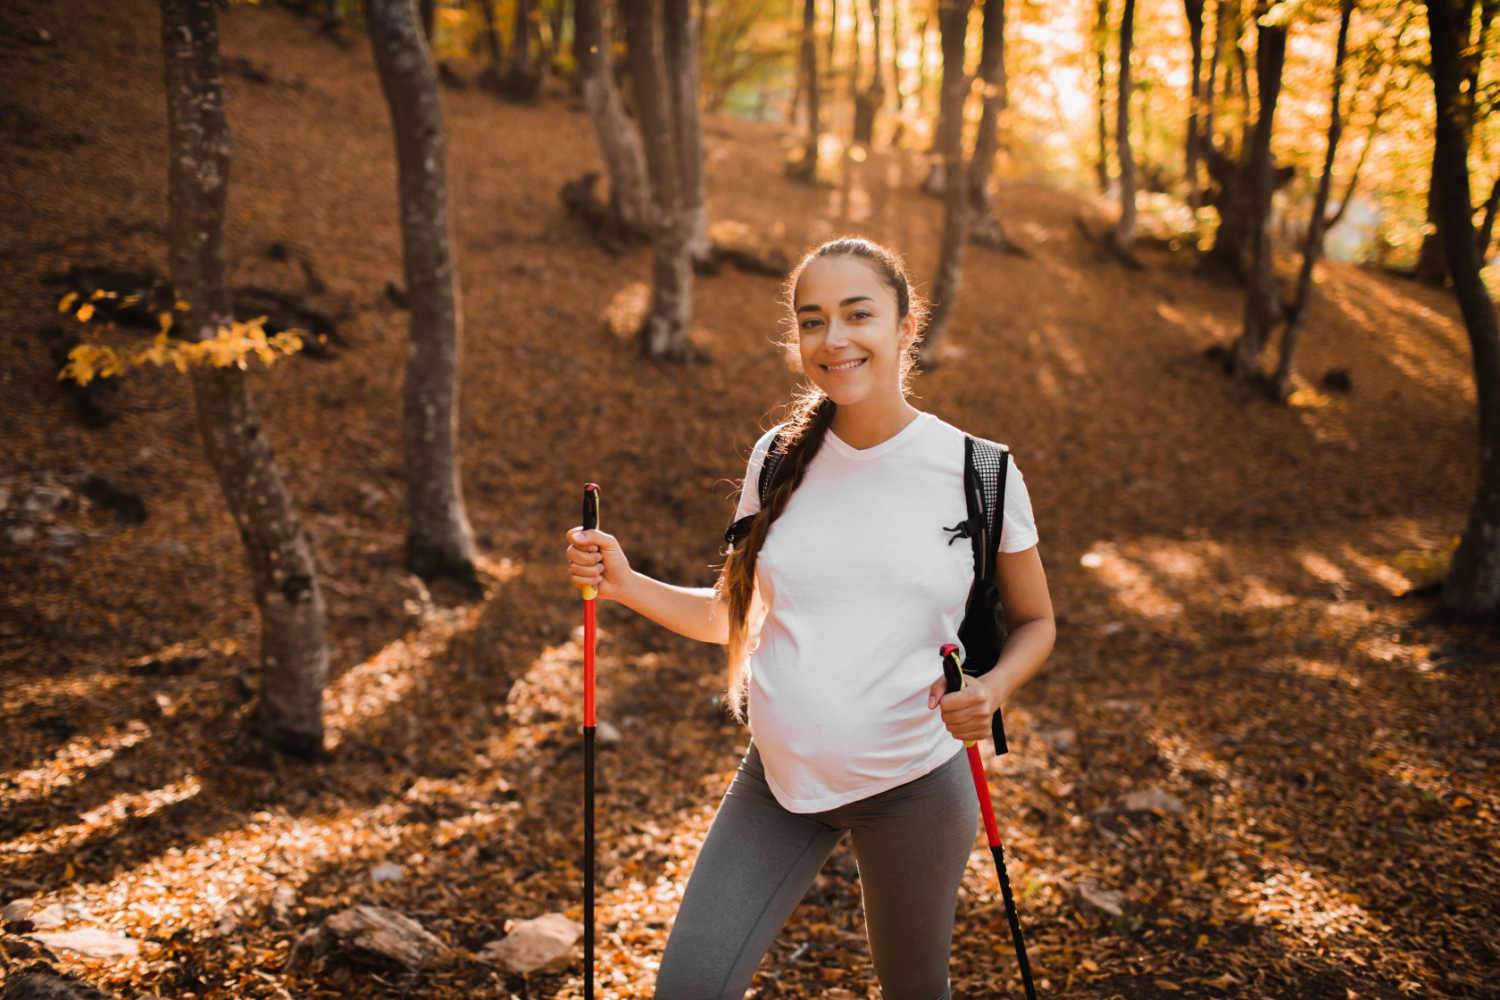 Hiking during pregnancy - benefits, precautions and safety